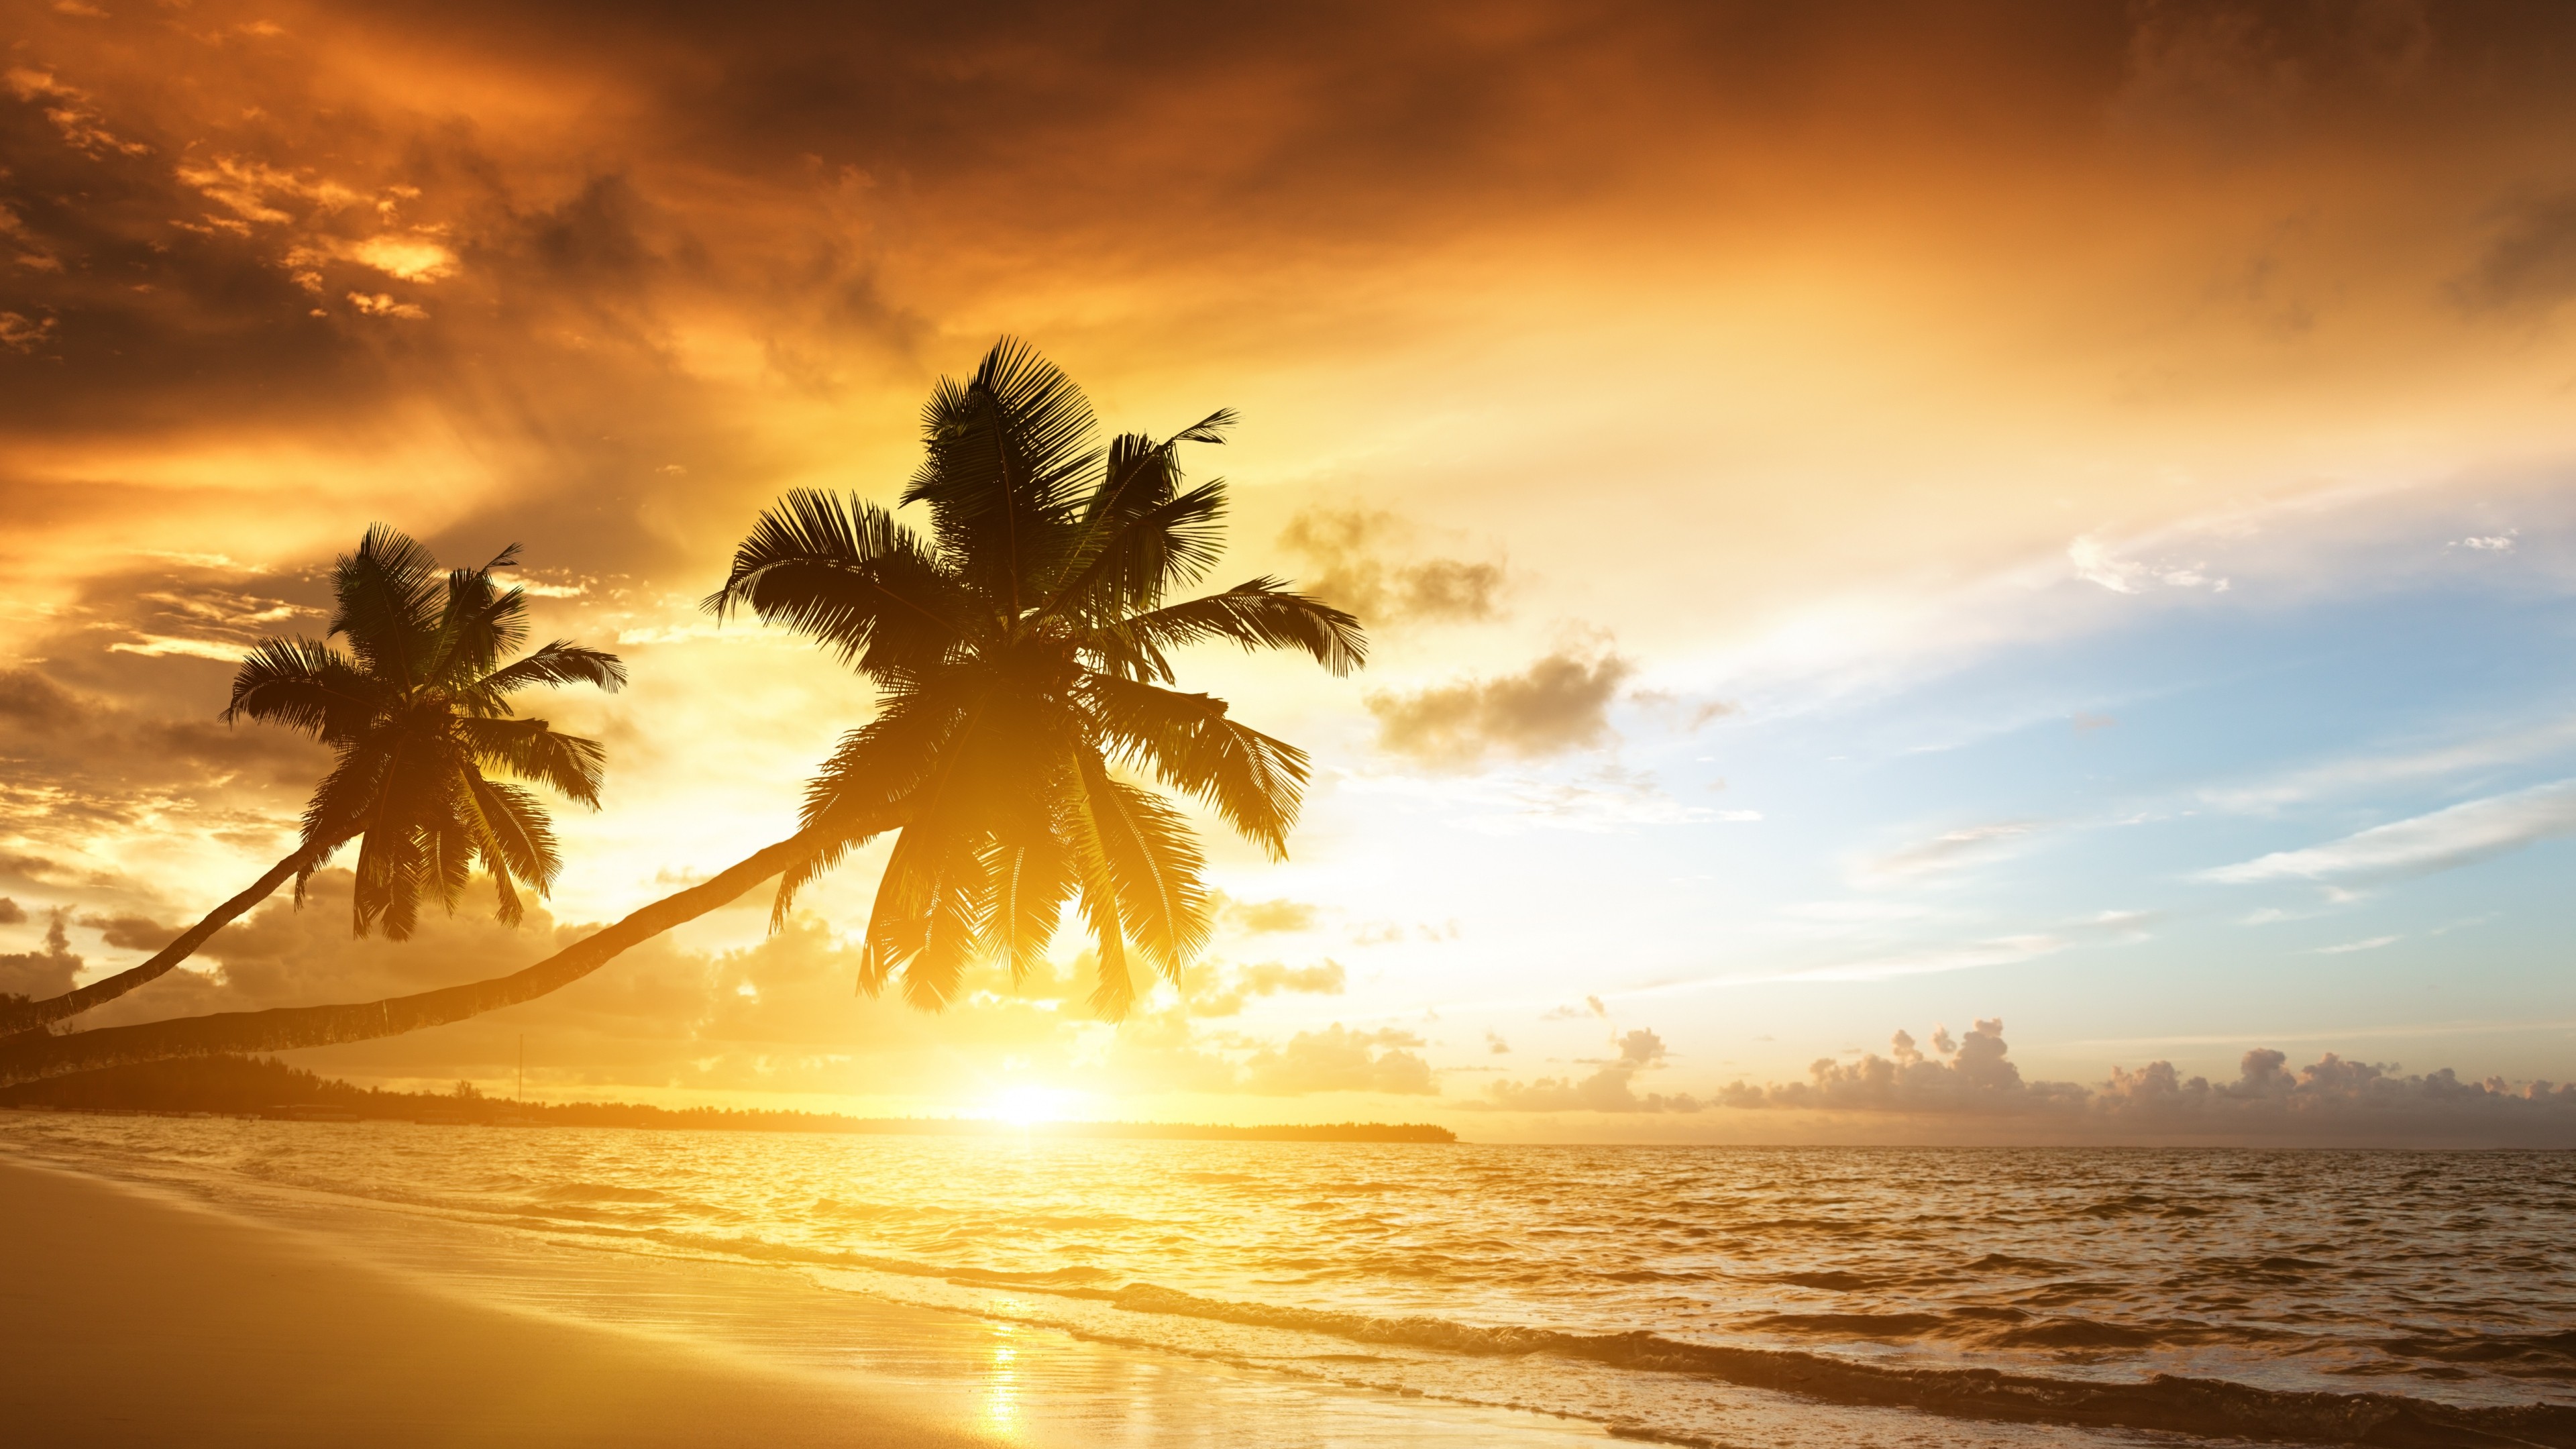 General 3840x2160 sunset beach sky clouds nature trees orange sky sea water palm trees sunlight overexposed